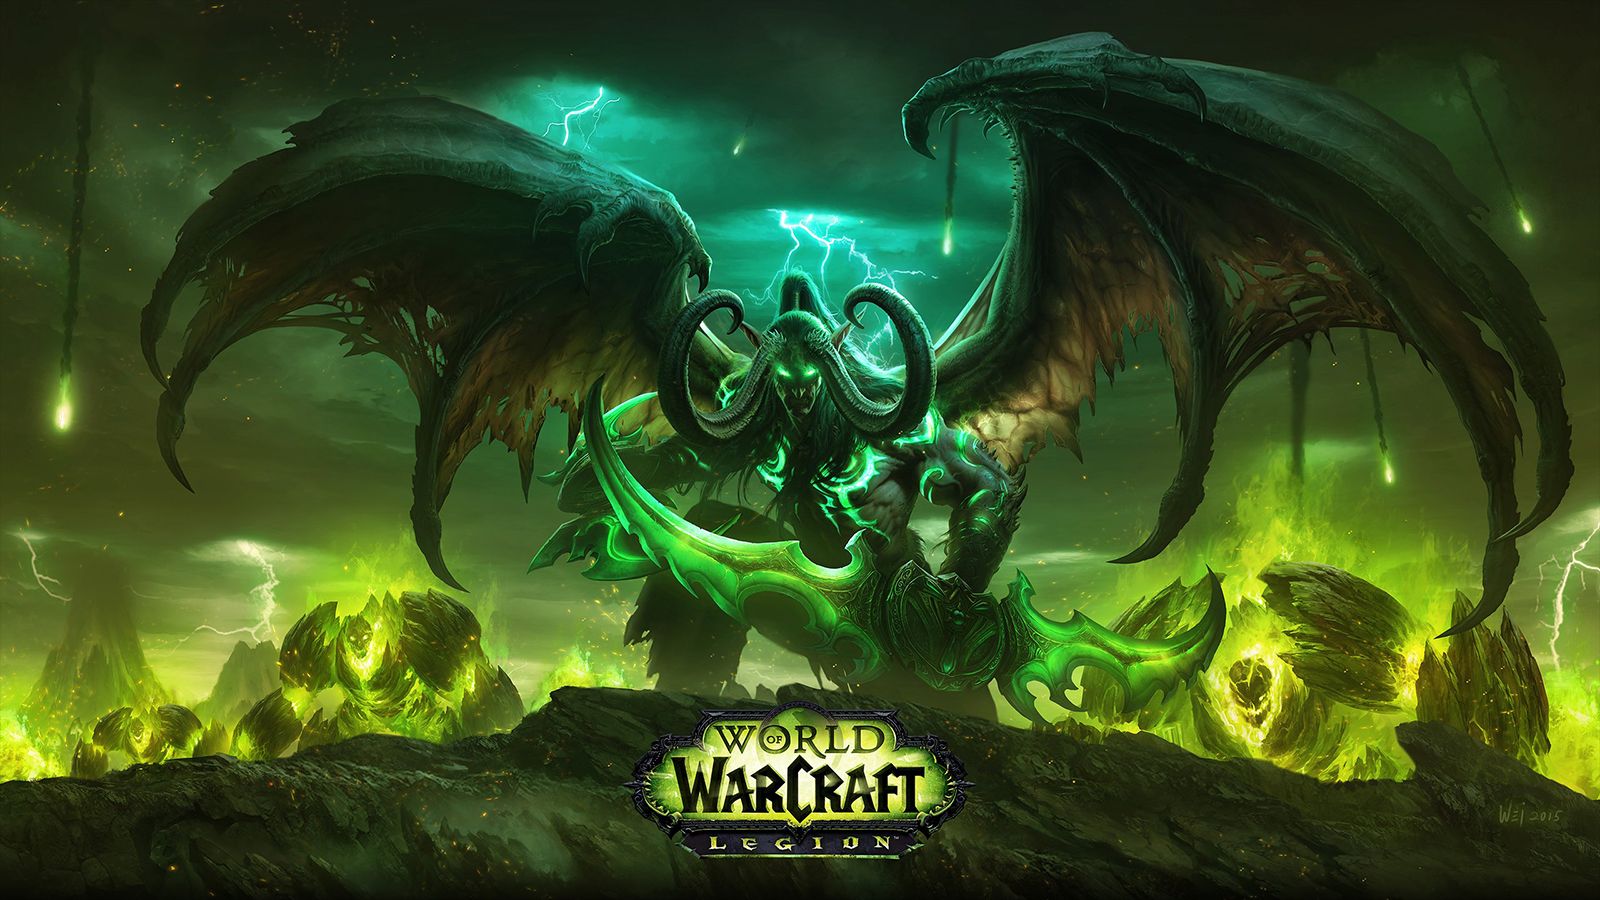 world of warcraft legion expansion reveals new class level up and more image 1